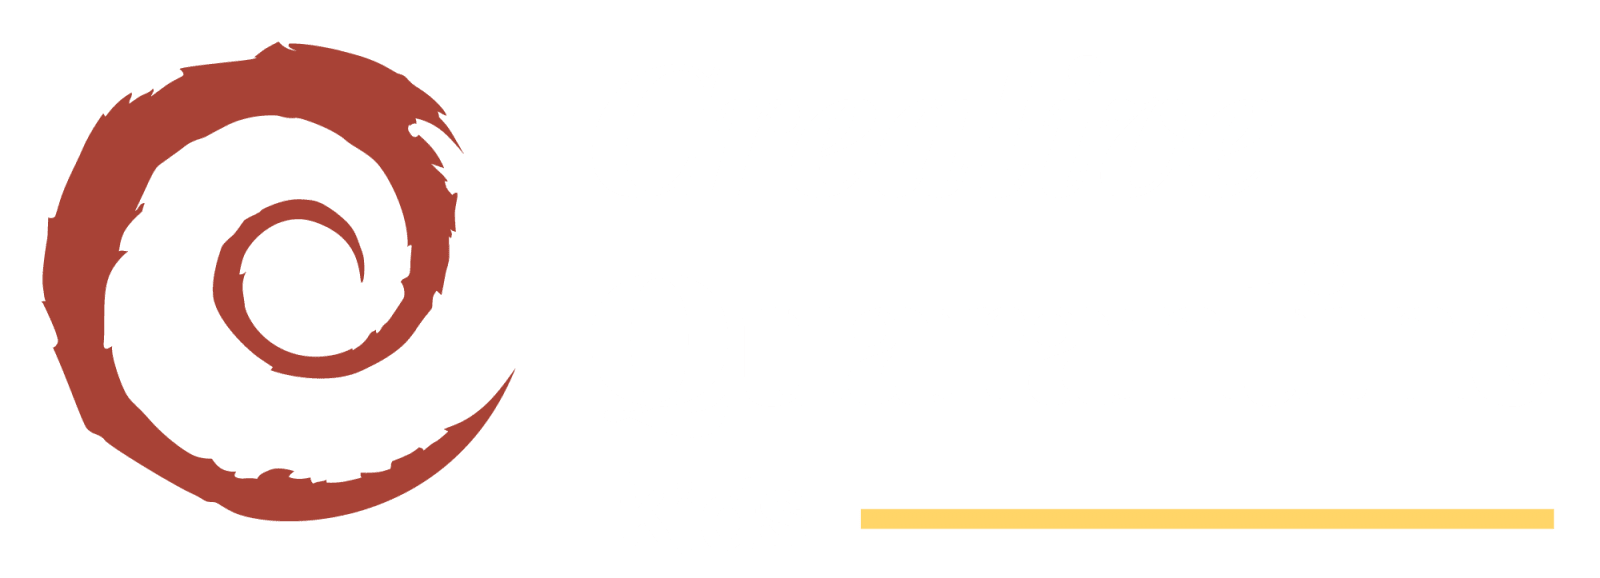 Creative Quarantine KIDS, a project of the Lincoln City Cultural Center